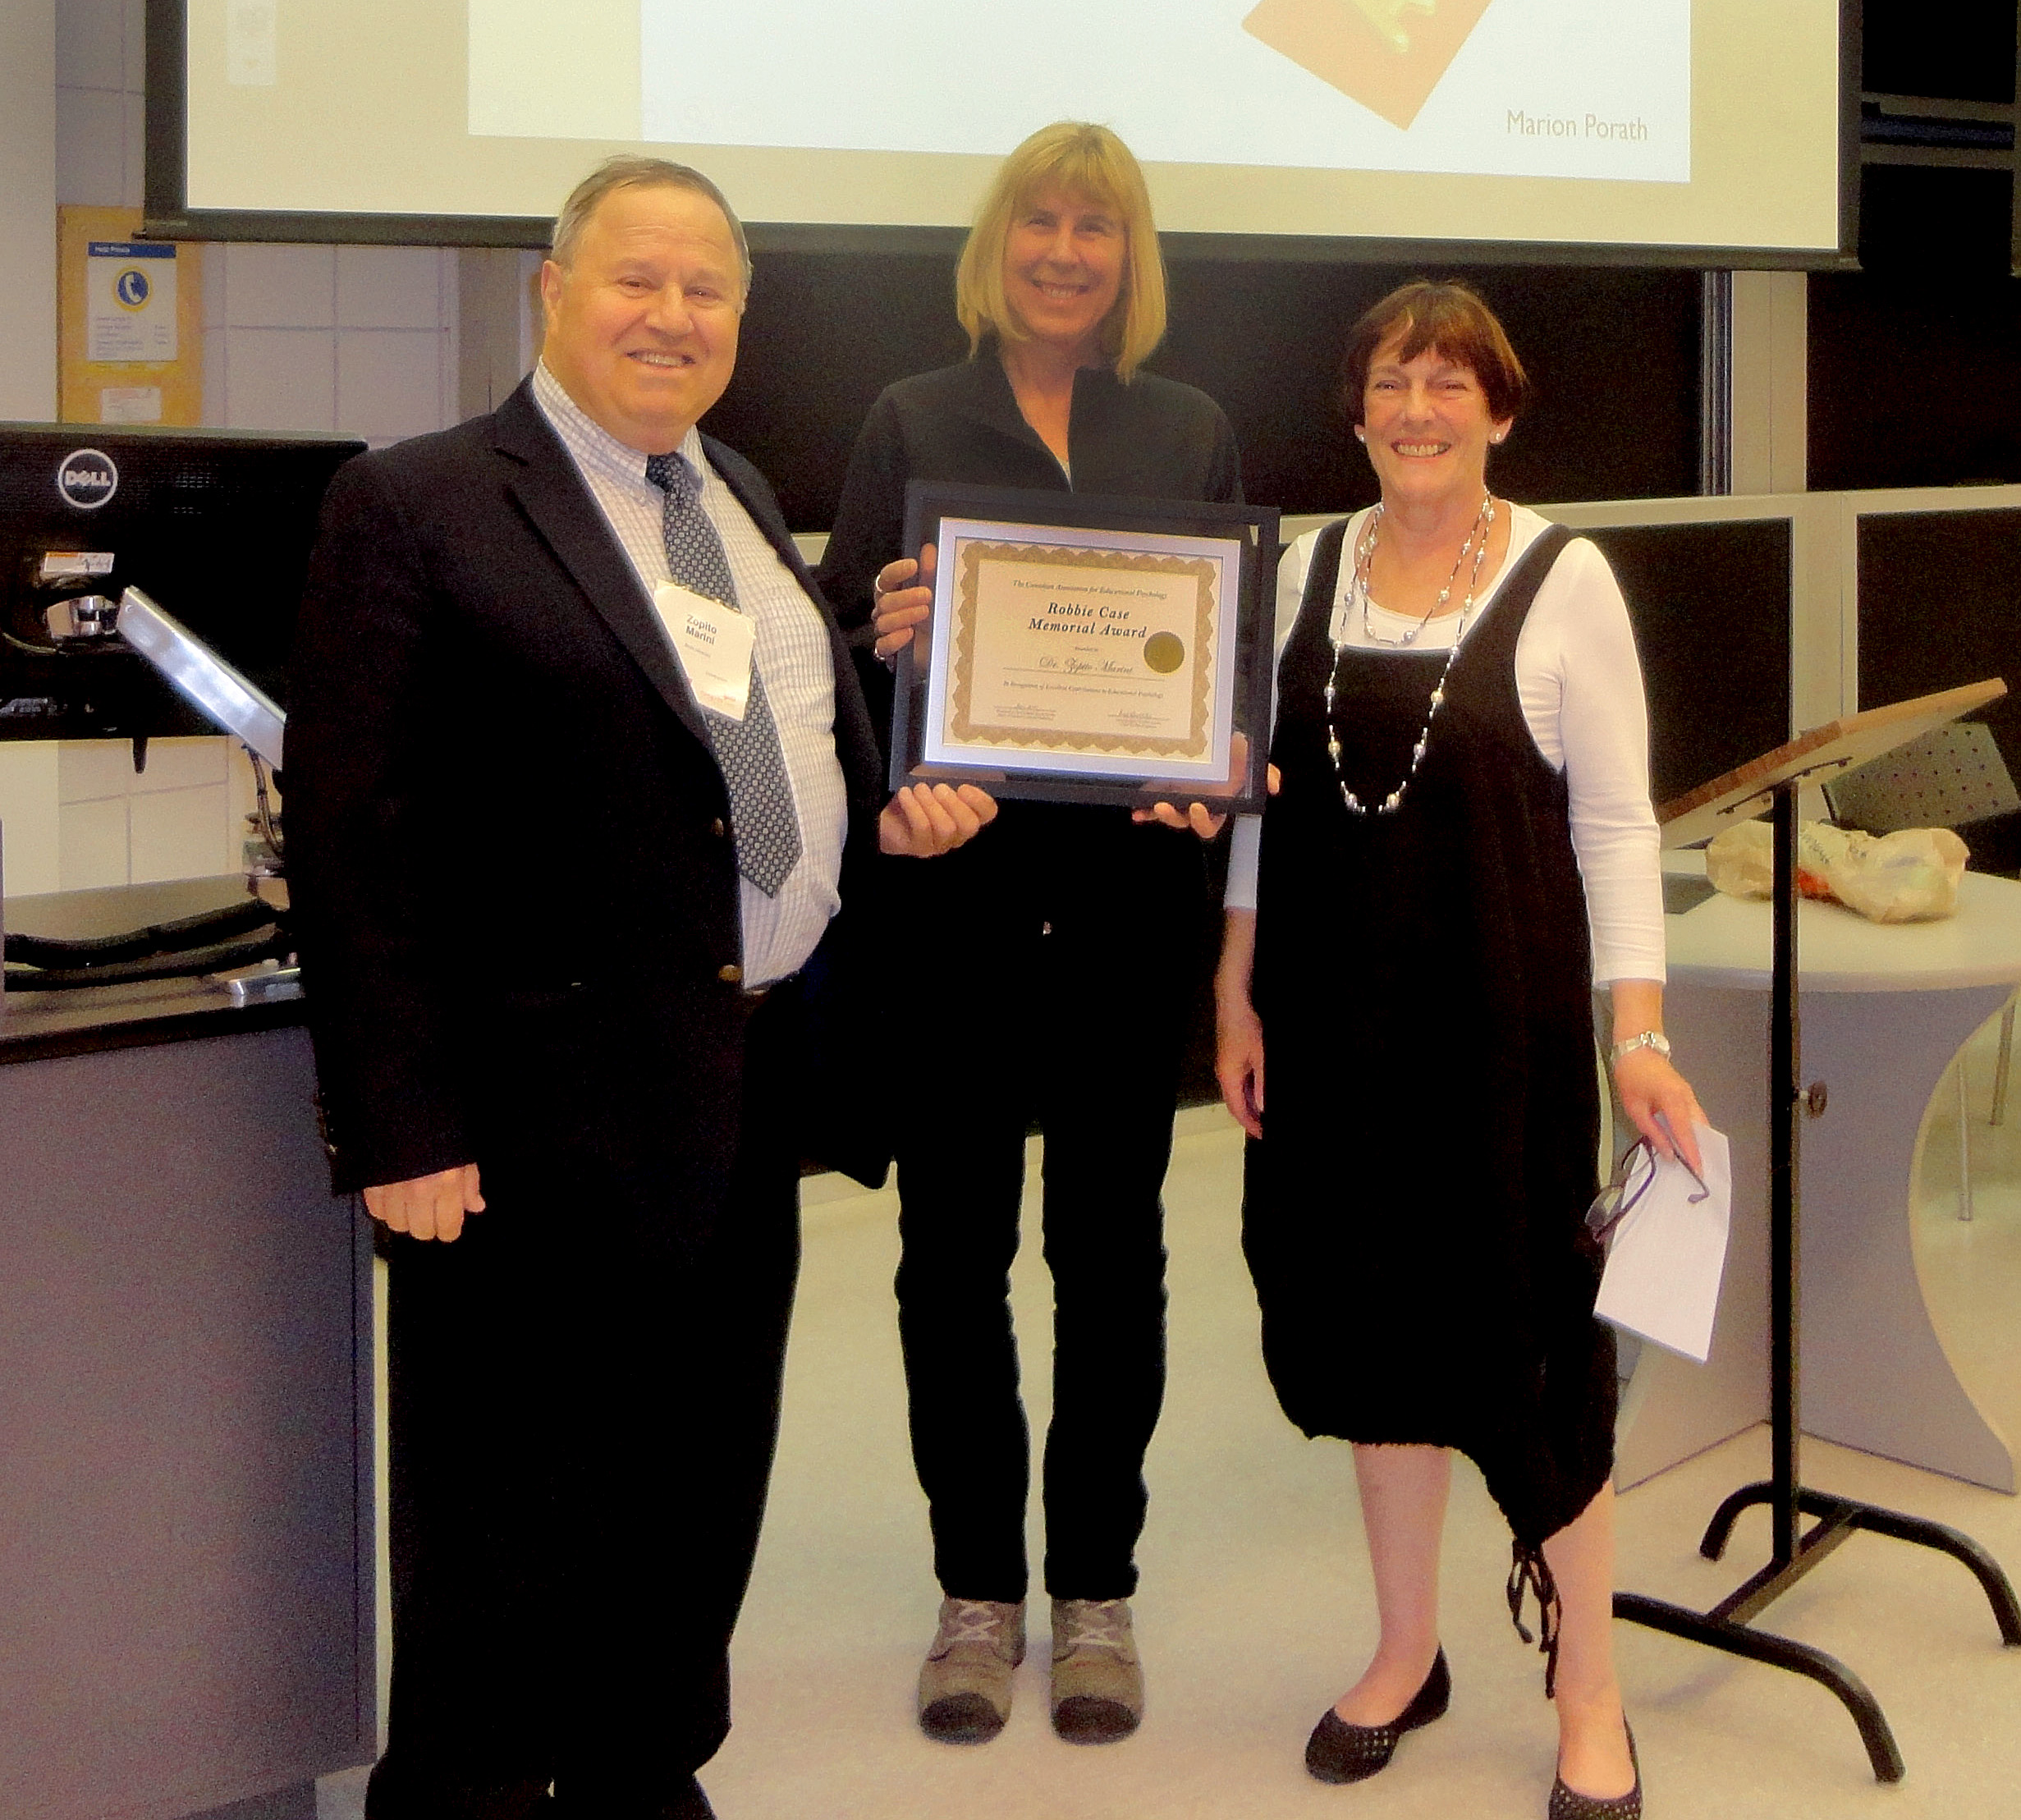 Zopito Marini. left, with Deborah Butler, President, Canadian Association for Educational Psychology and Marion Porath, Professor, University of British Columbia at the Robbie Case Memorial Award ceremony in Calgary.